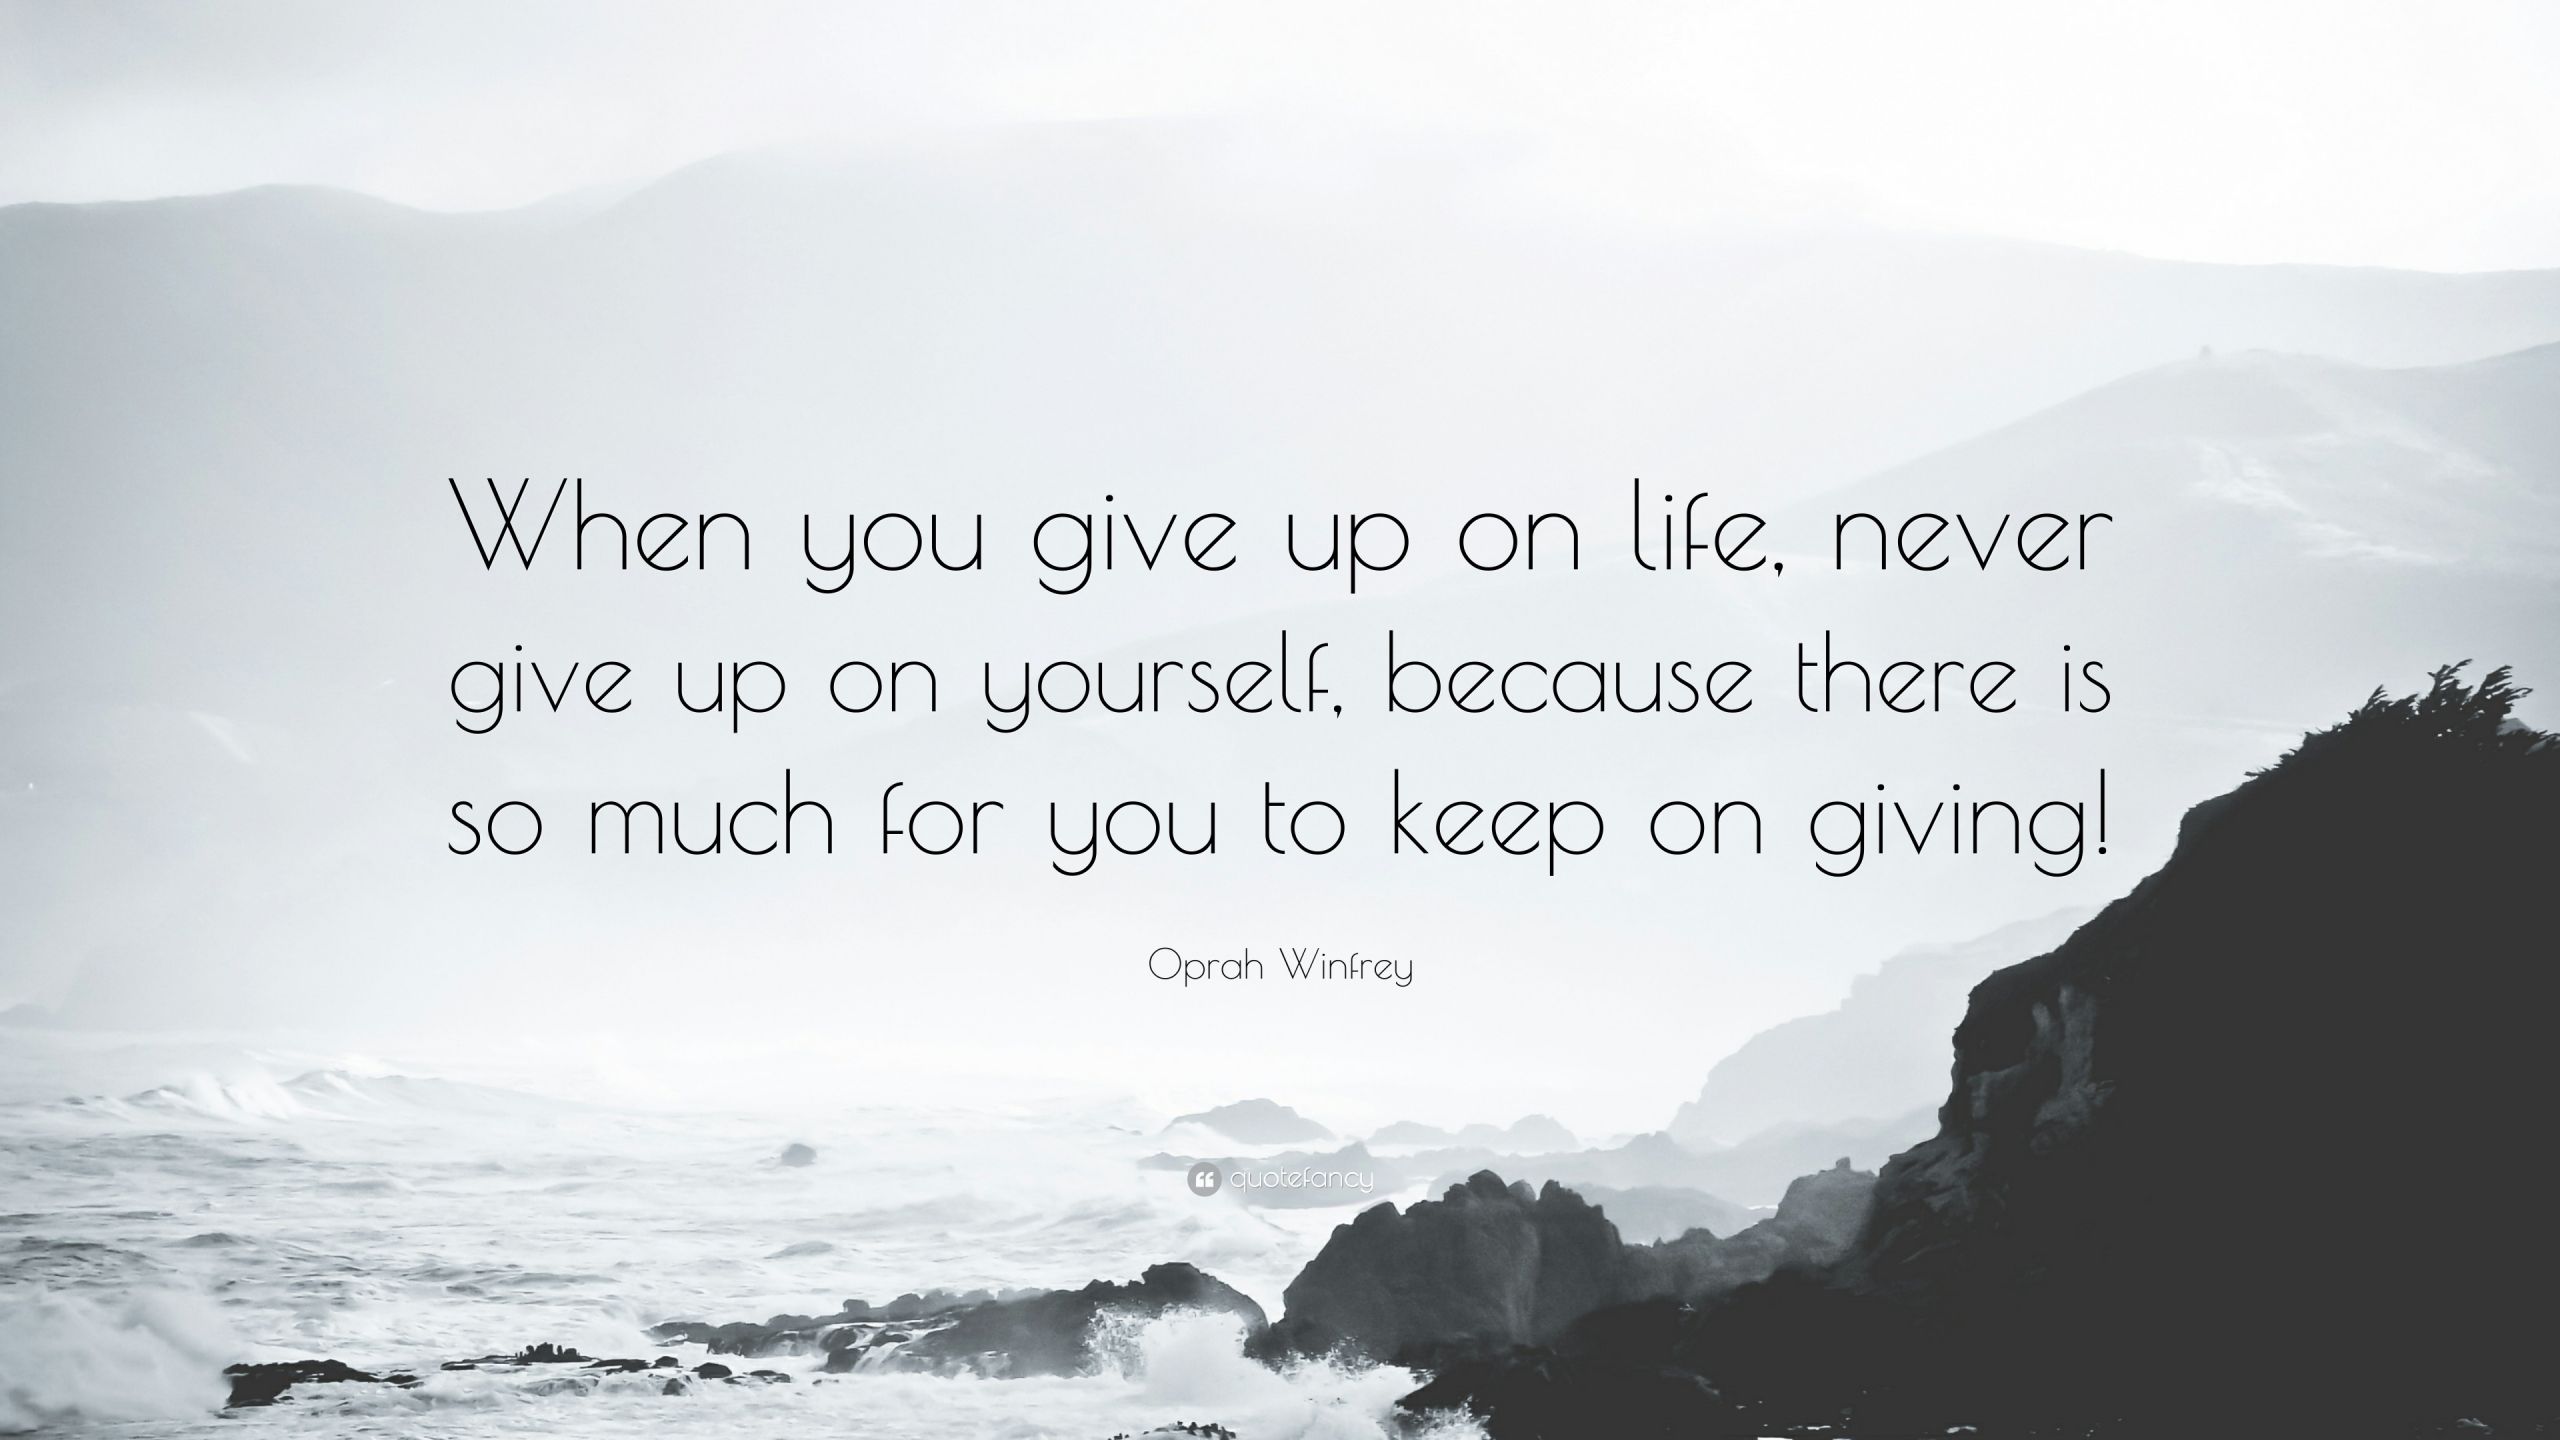 I Give Up On Life Quotes
 Oprah Winfrey Quote “When you give up on life never give